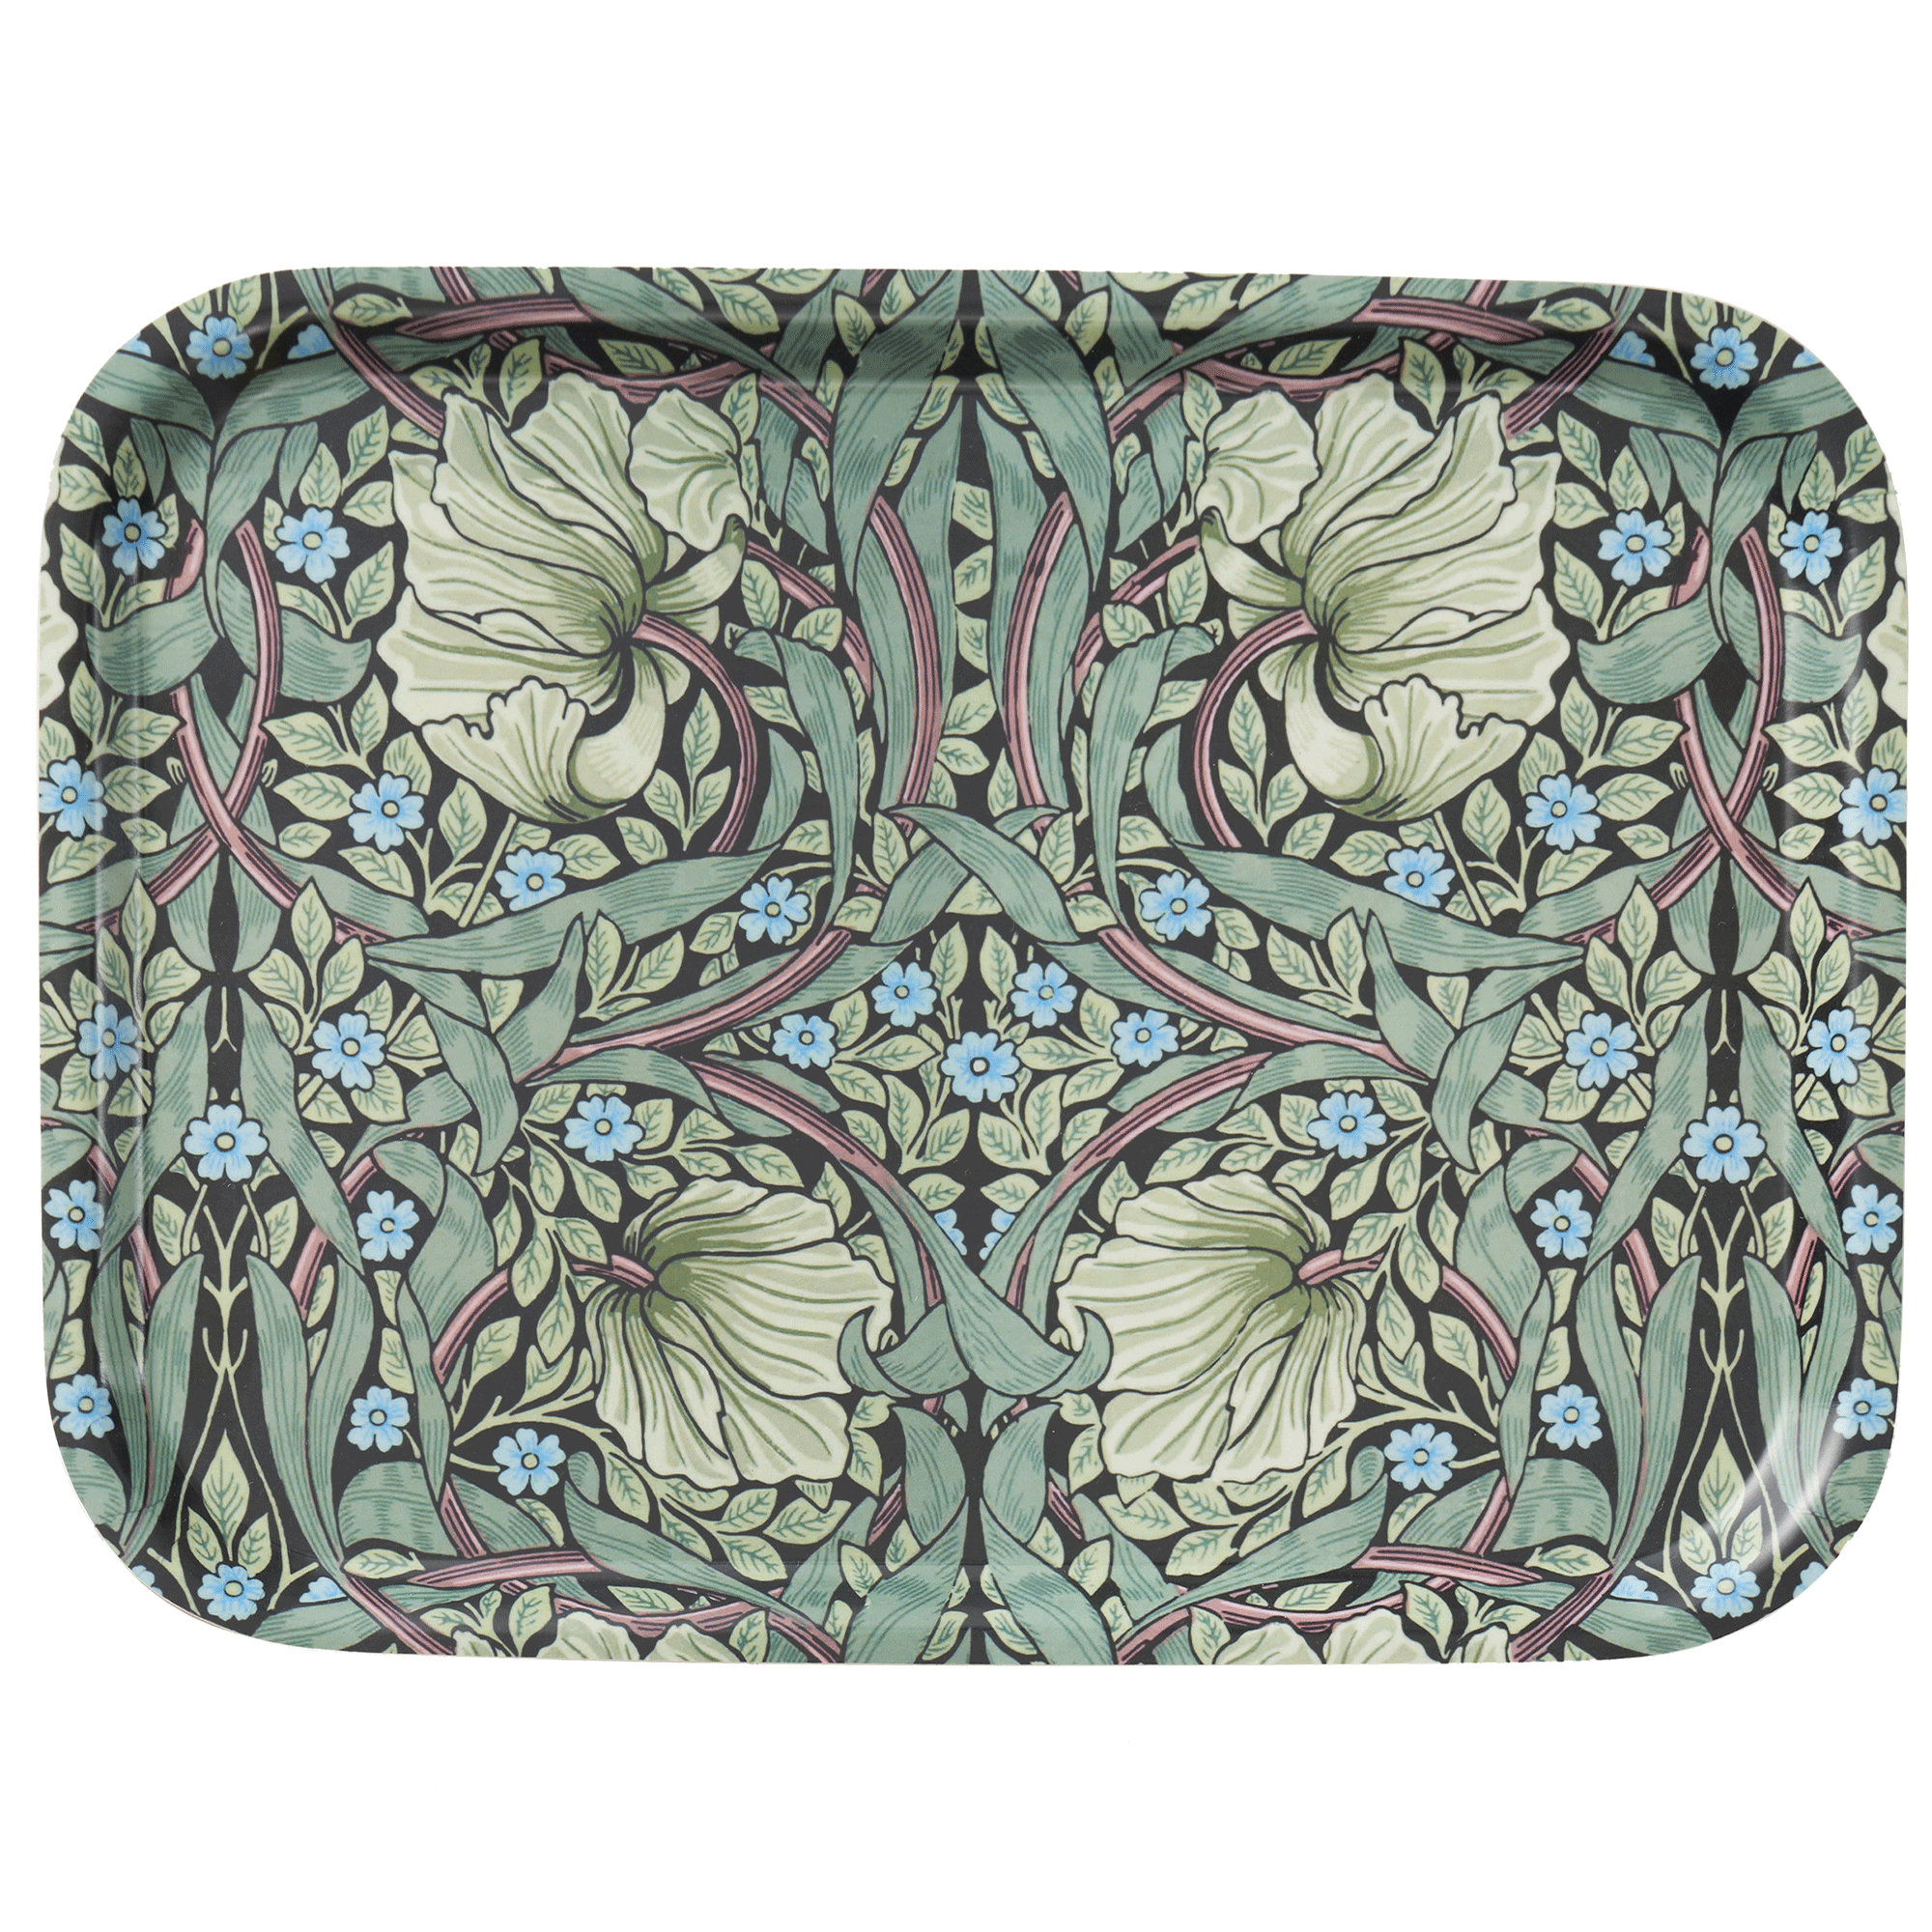 Pimpernel Small Tray